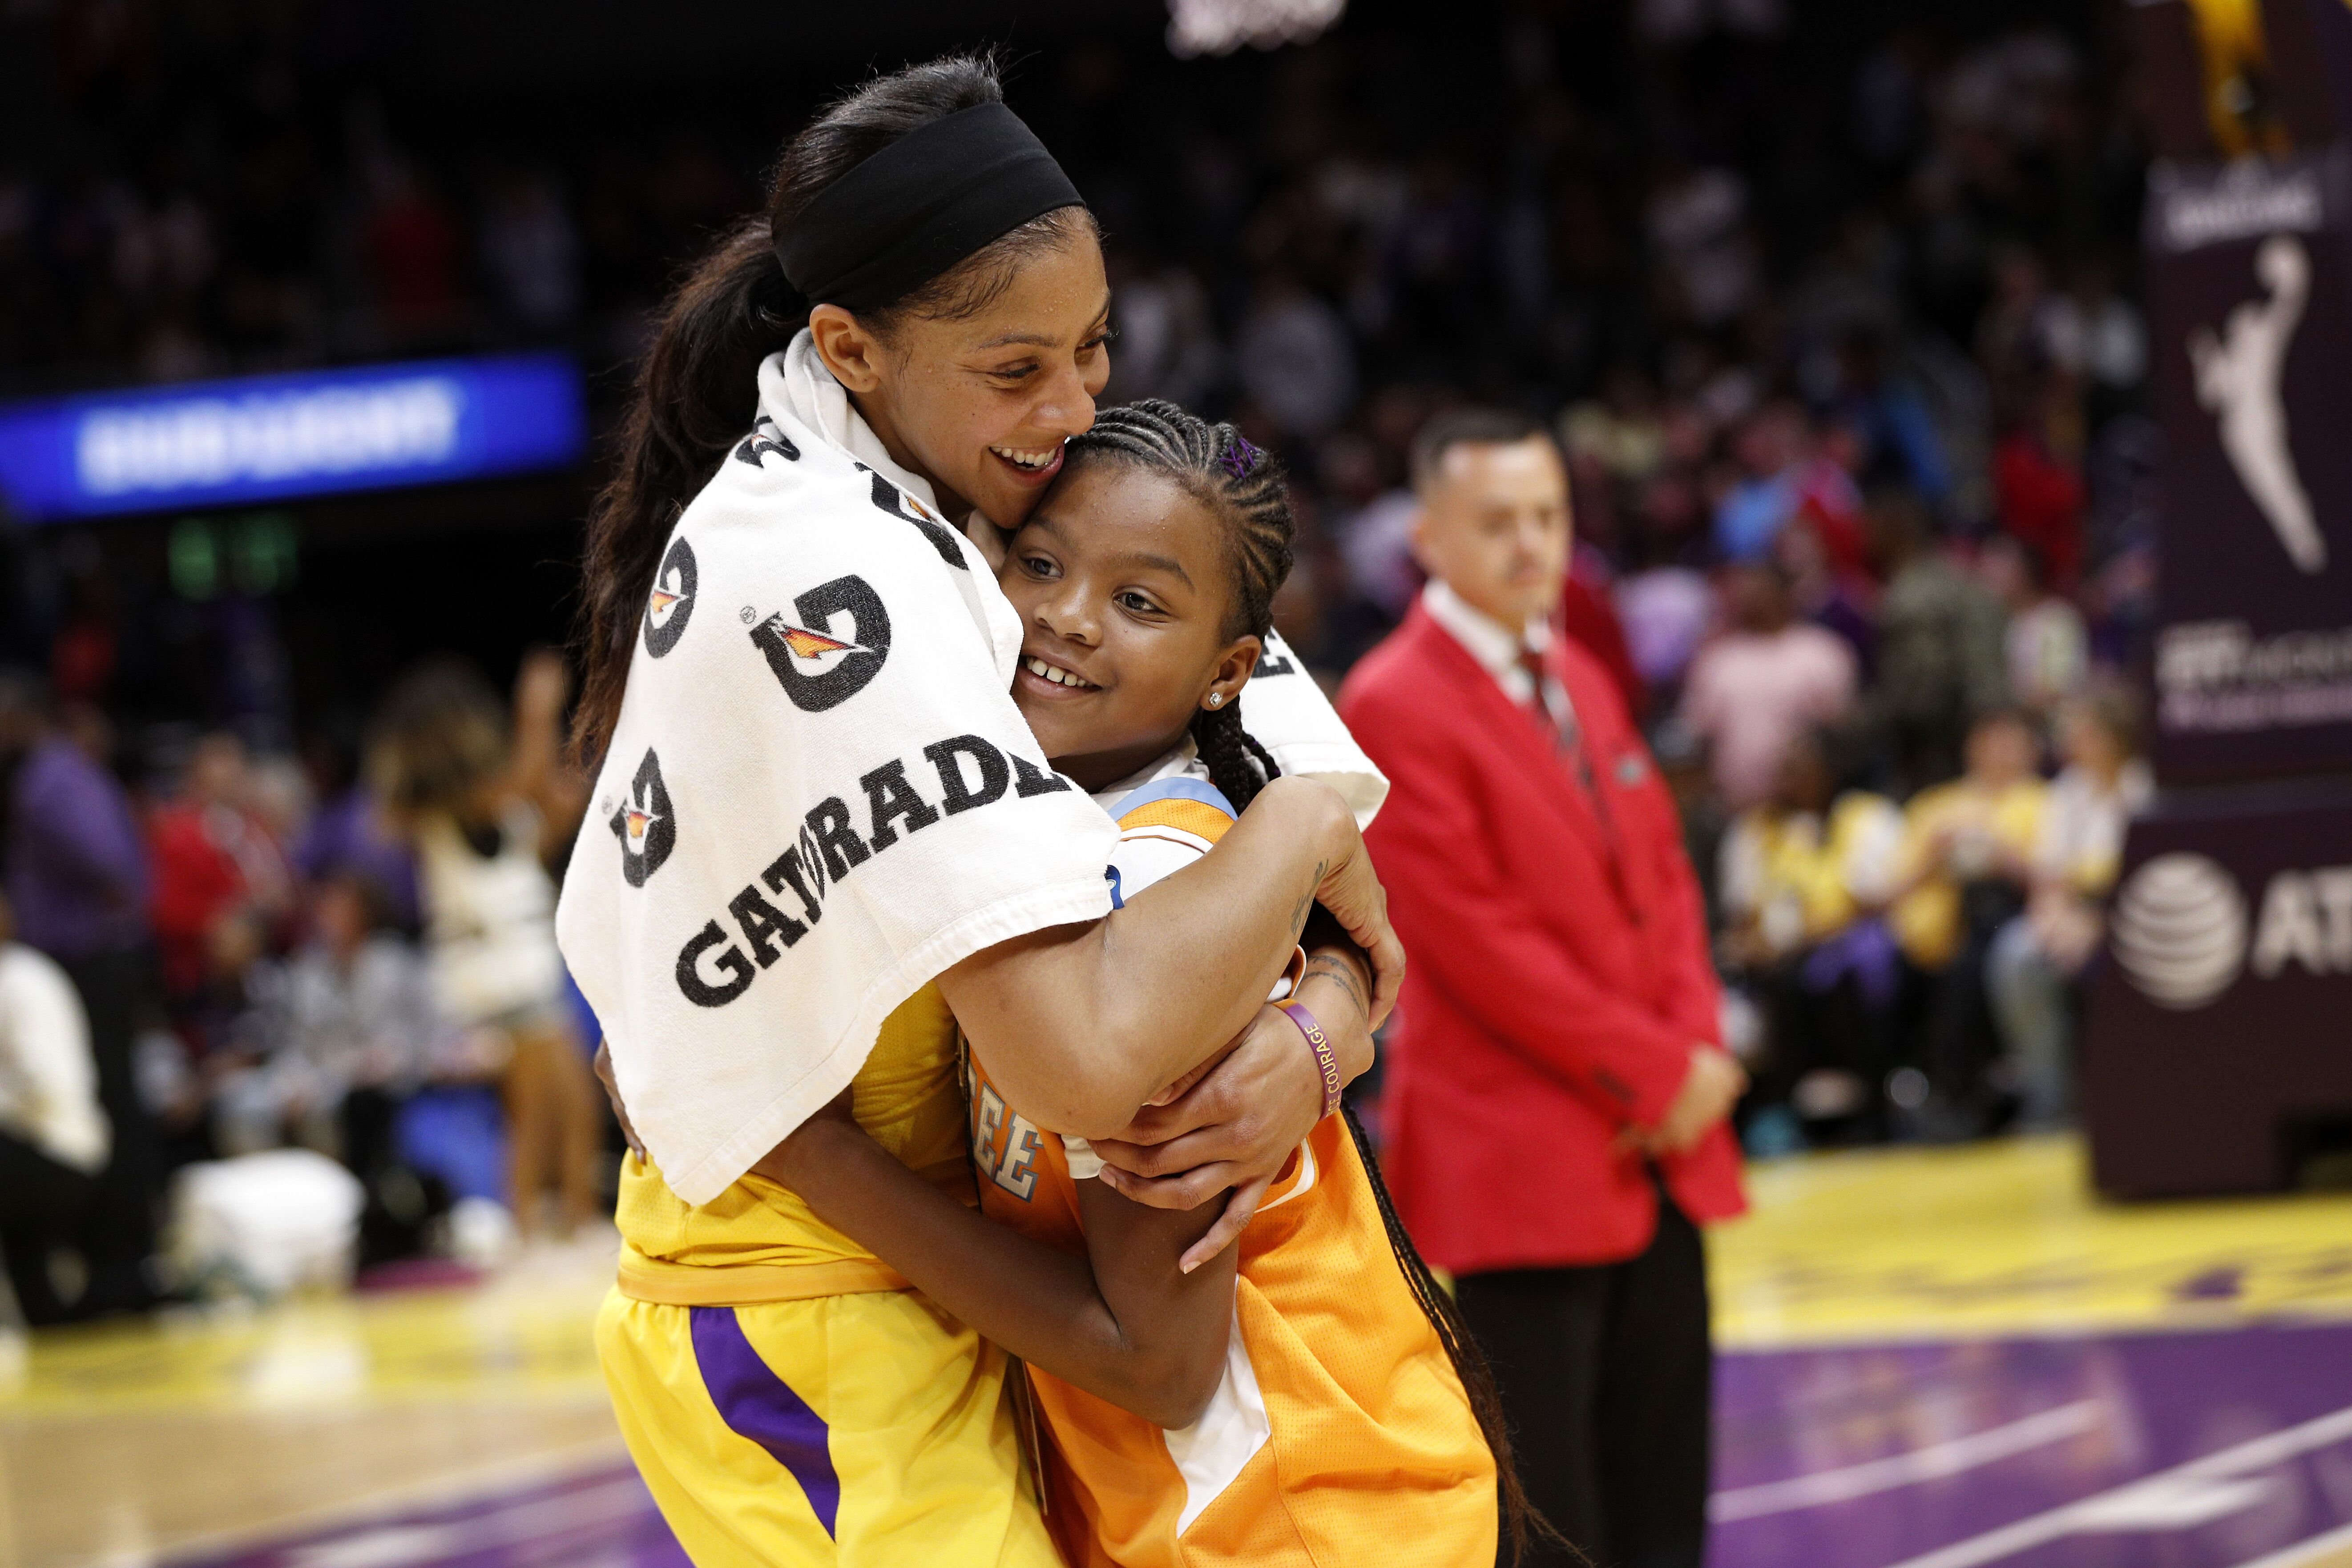 Wnba Player Candace Parker Her Daughter Lailaa Join Serena Williams As Co Owners Of Nwsl Team